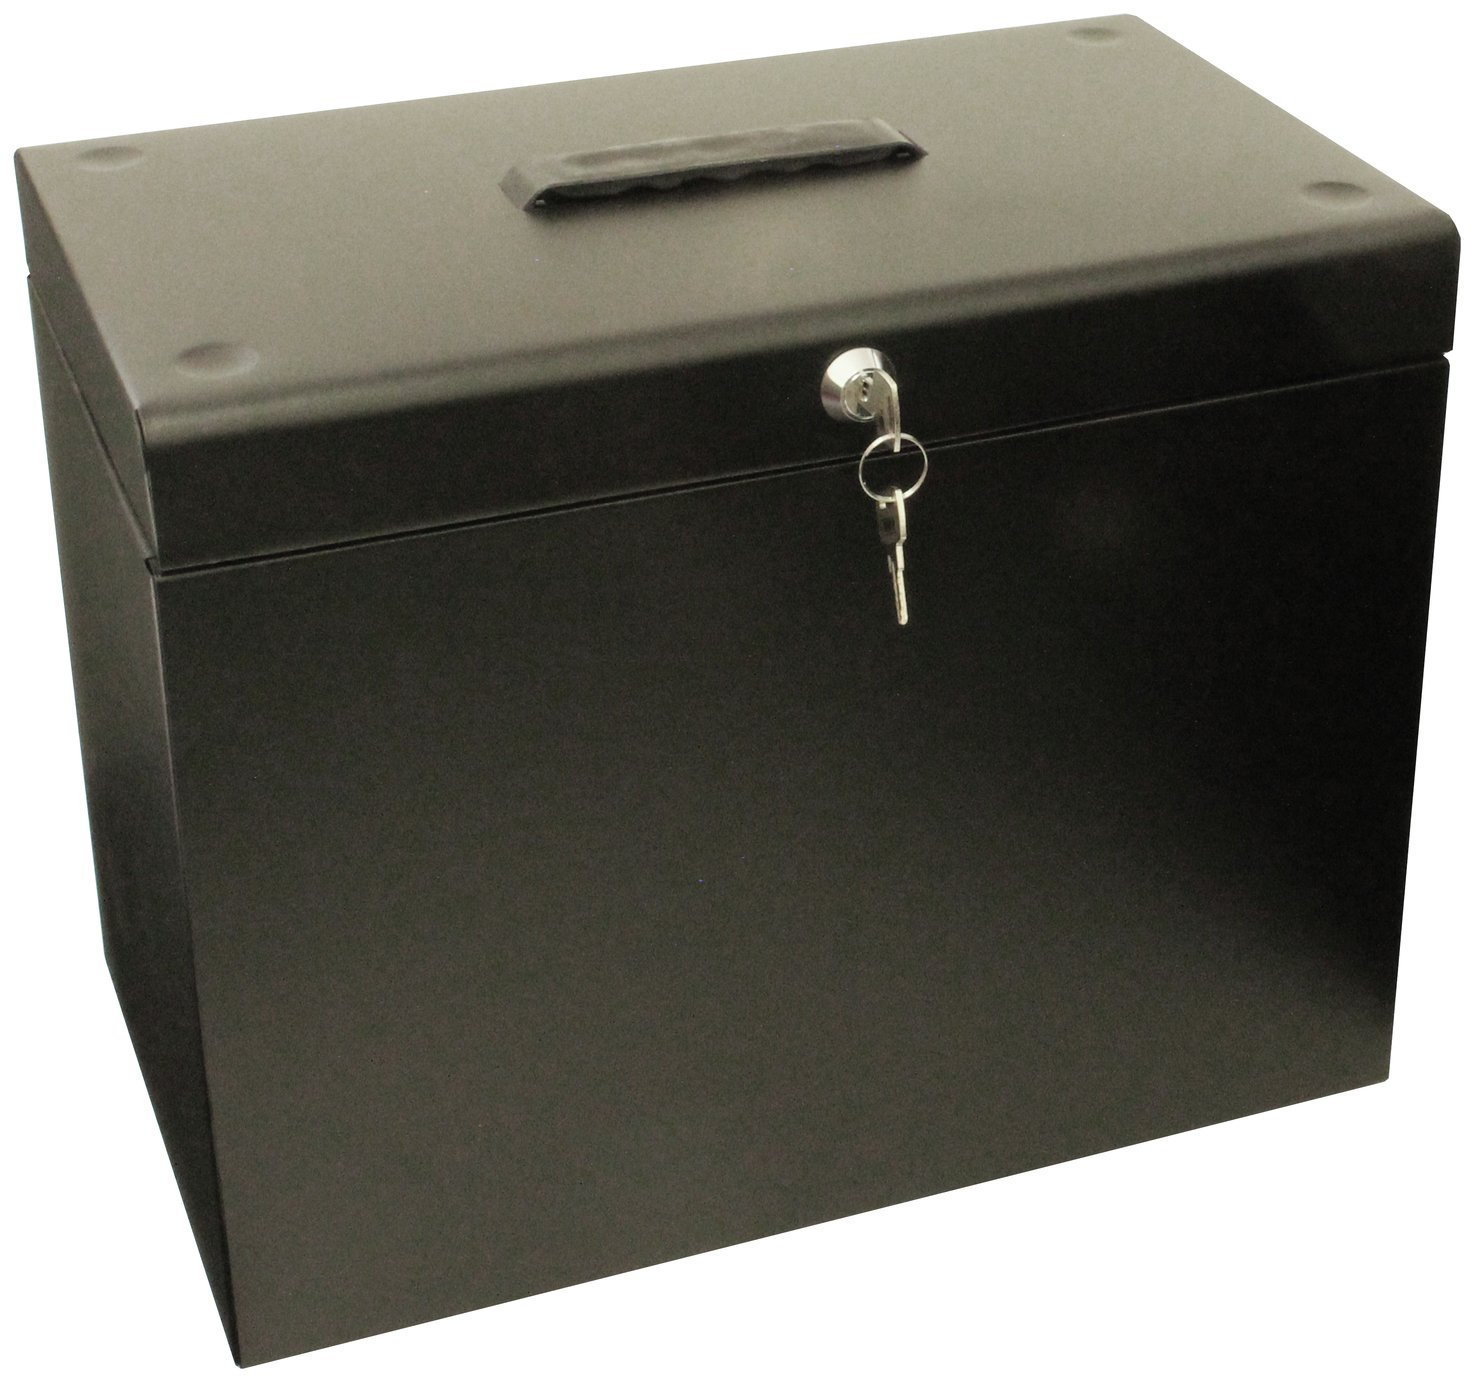 Cathedral A4 Metal File Box - Black